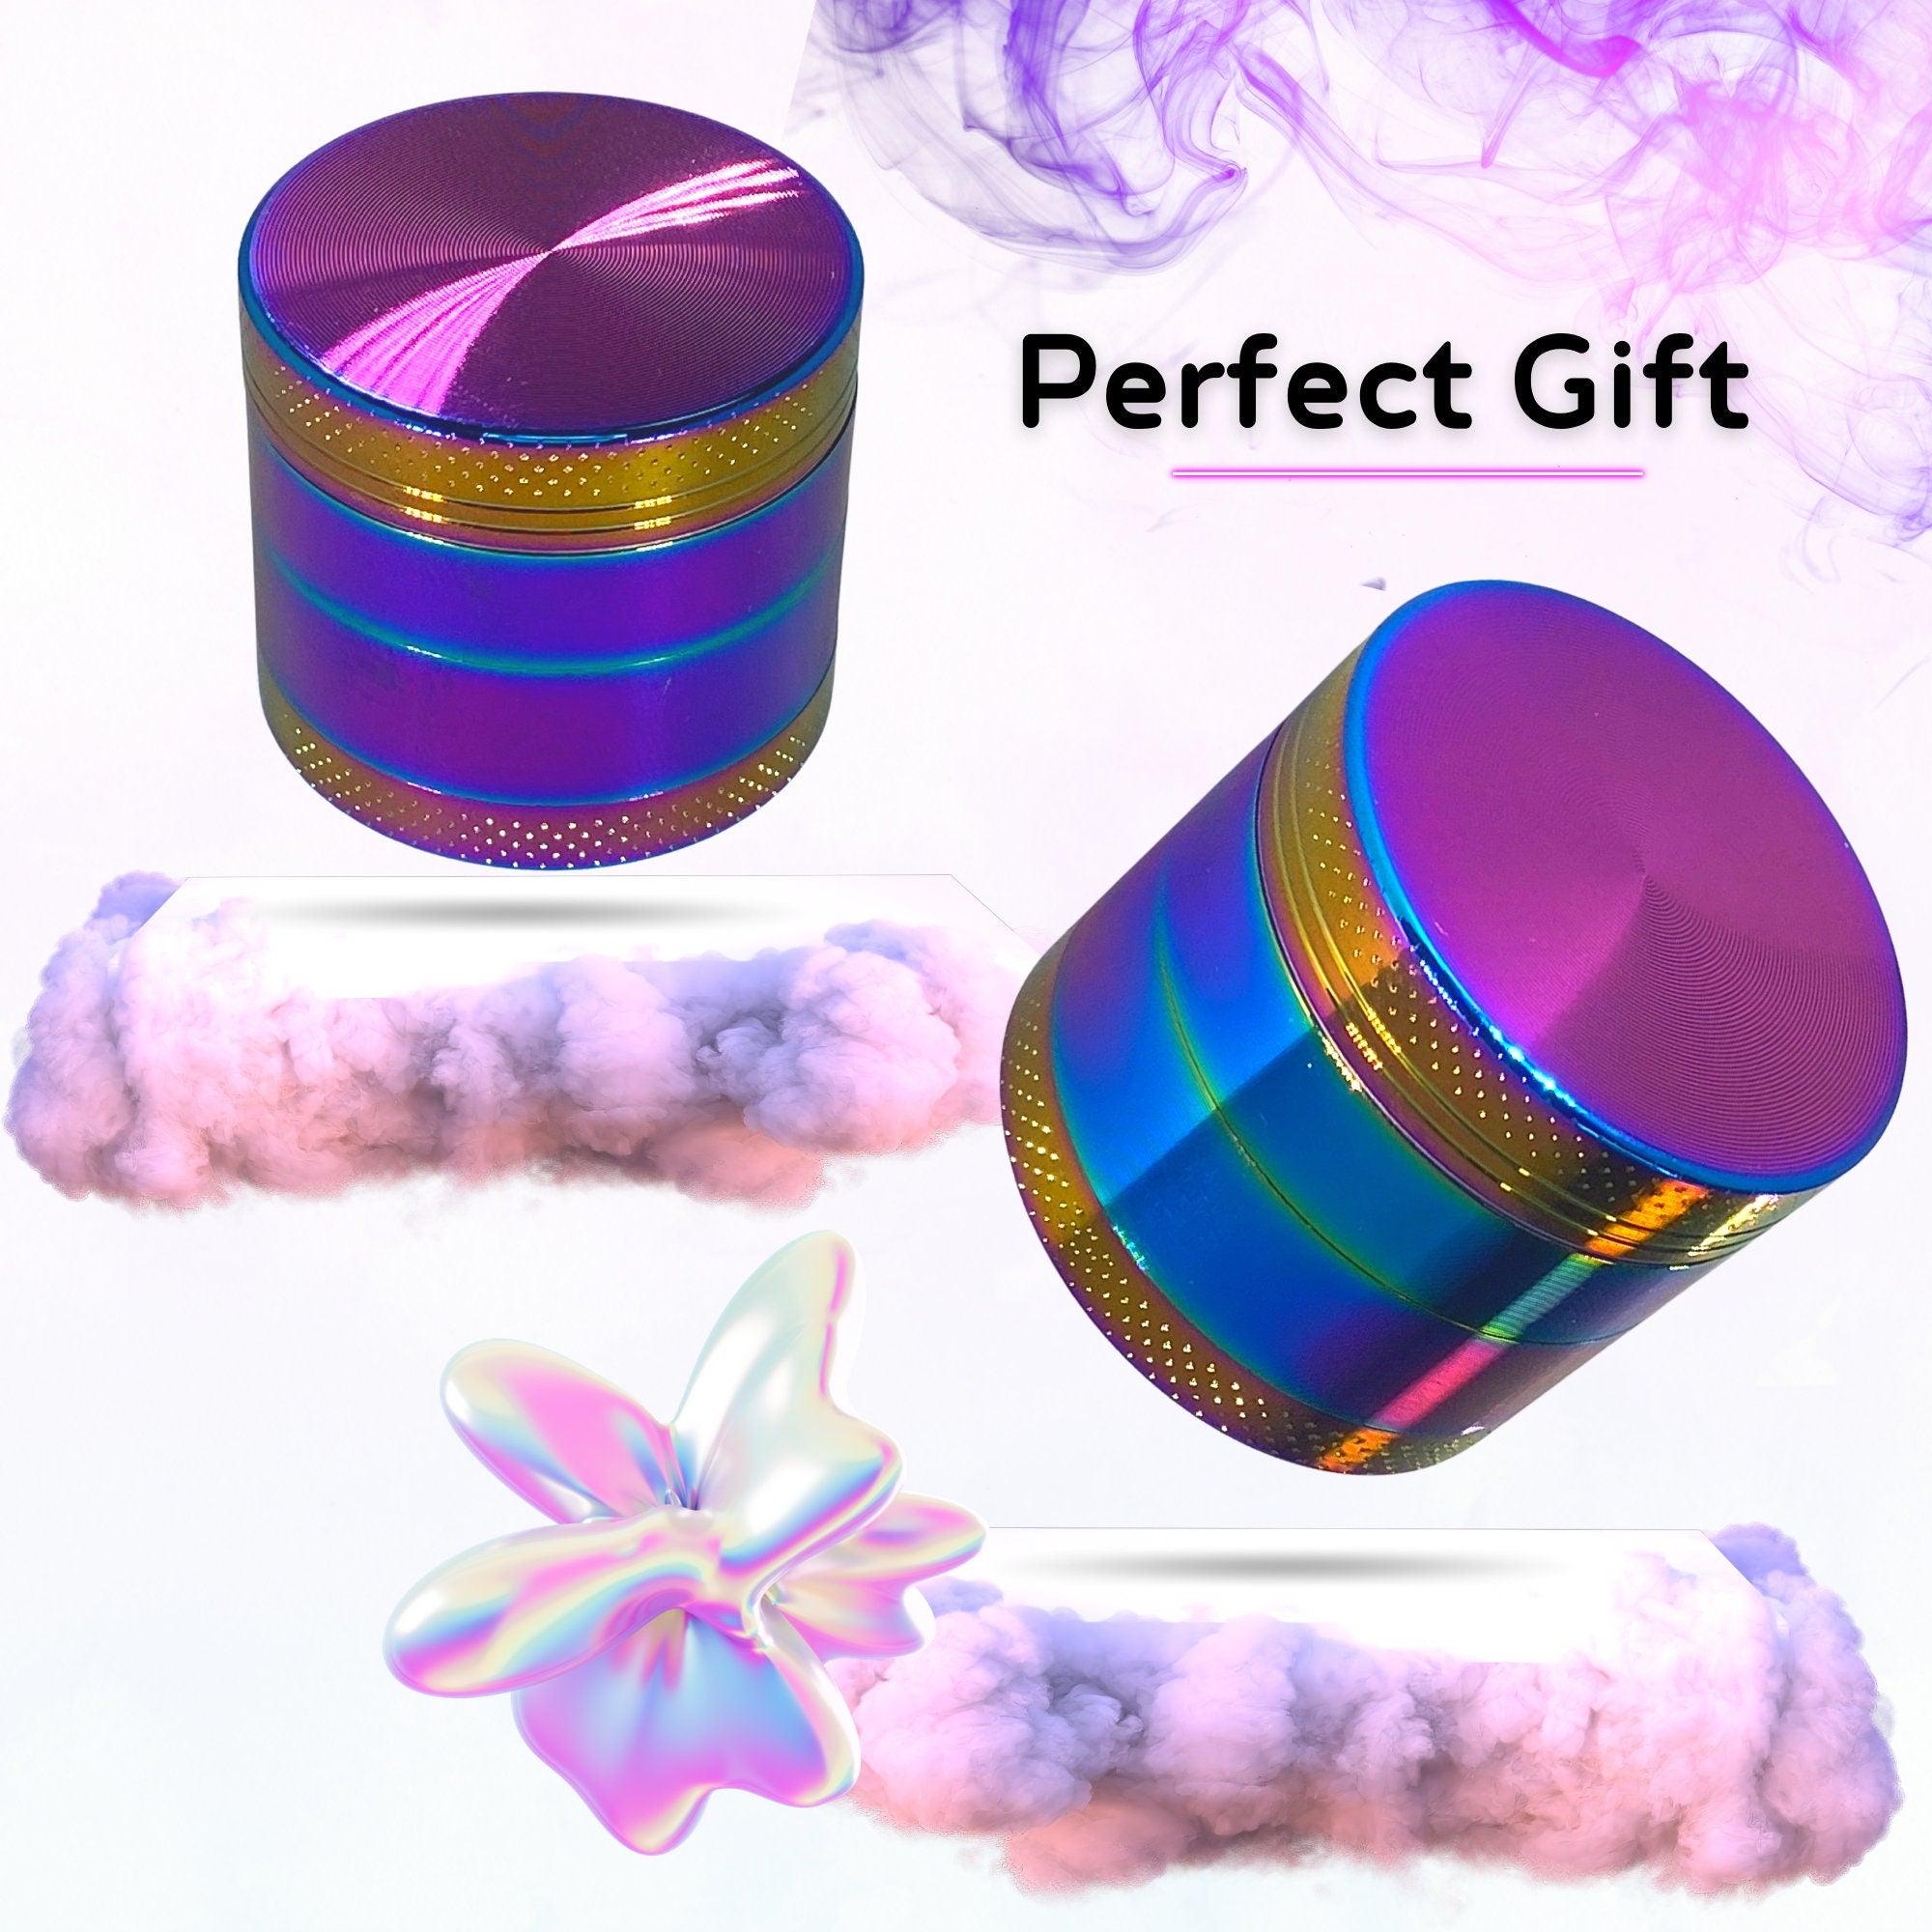 Iridescent Weed Grinder | Pocket size, Spice cannabis grinders, weed accessories,Pink, Psychedelic Rainbow Herb Girly, Tobacco Crusher Smoke